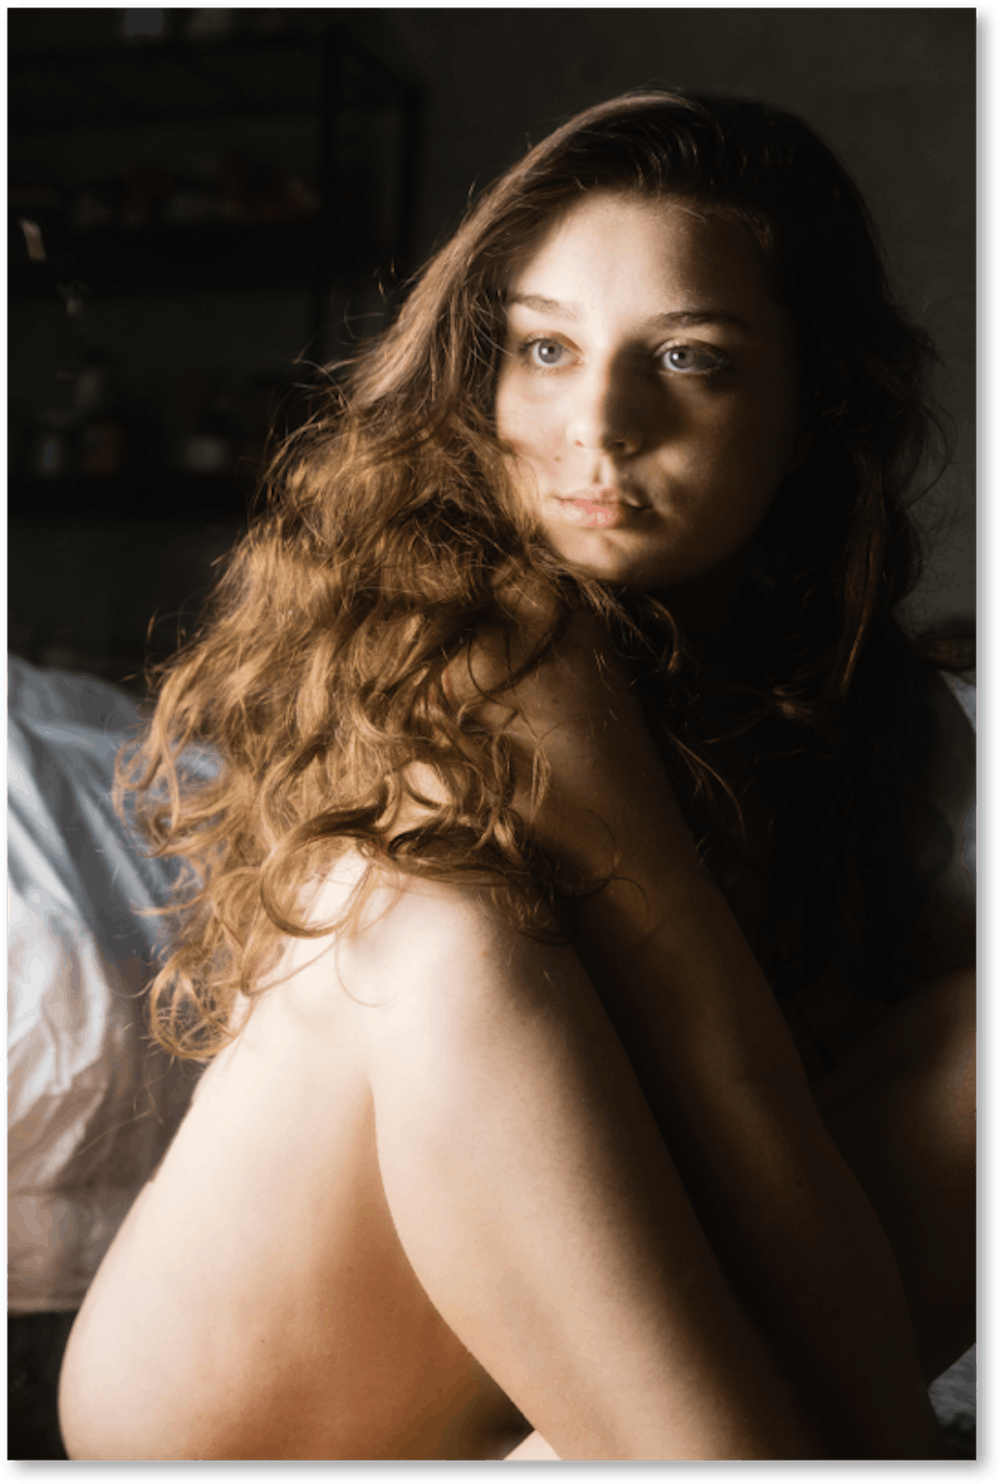 Focus on the positive photography nude